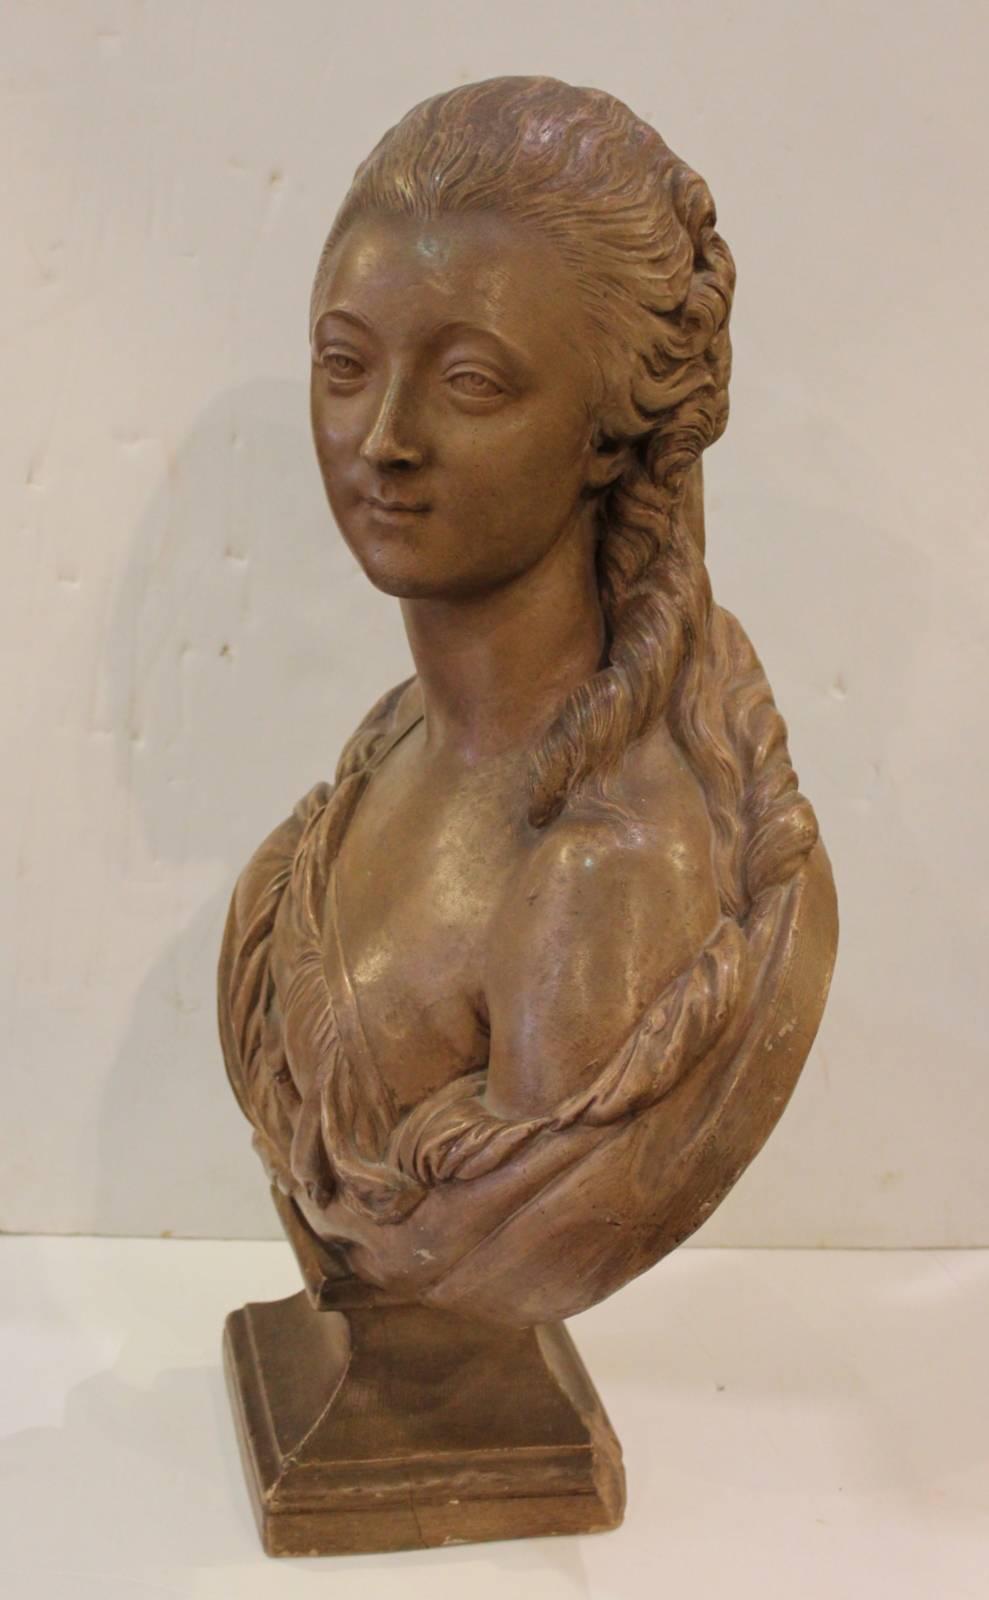 Large terracotta bust of a draped Madame Du Barry. Dressed in period clothing, resting on a square plinth base.
This French noble woman bust in the style Houdin a noted French sculptor.